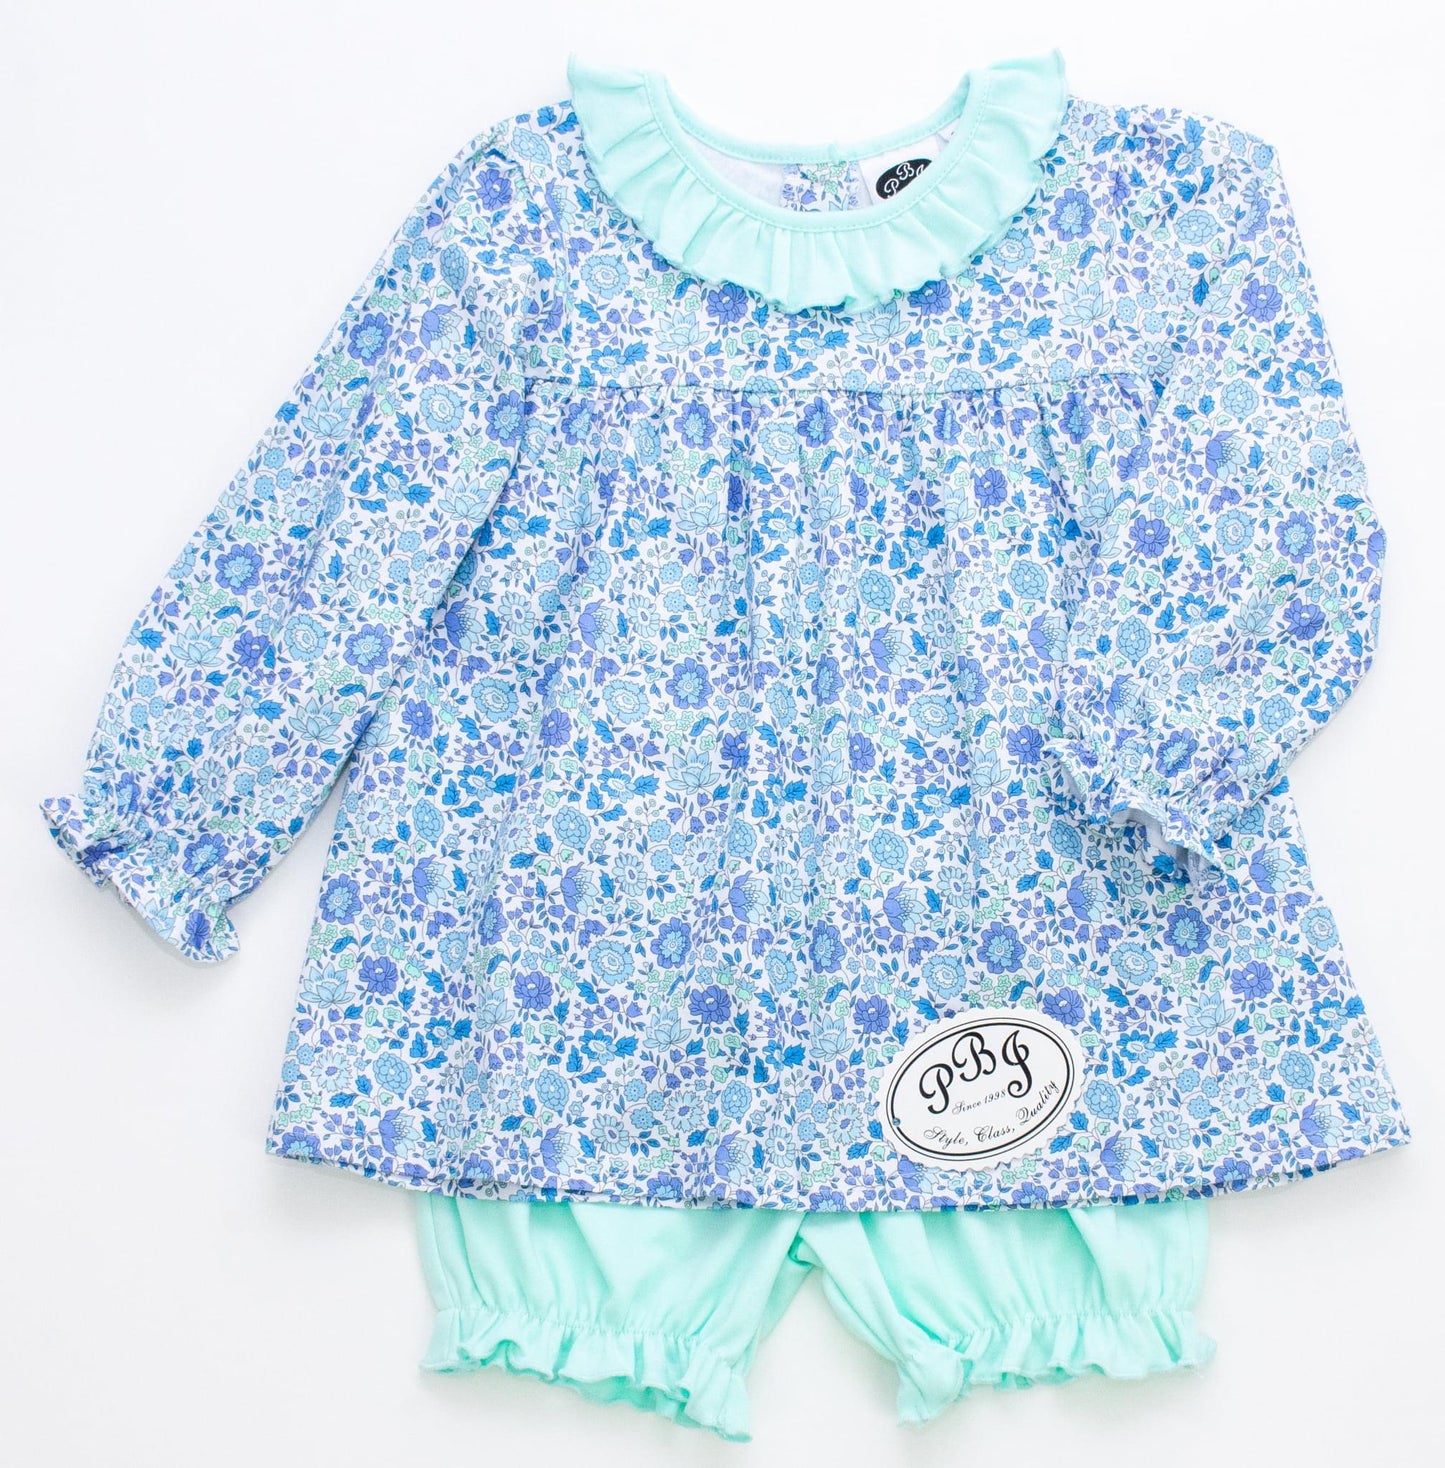 Lilly girl top*